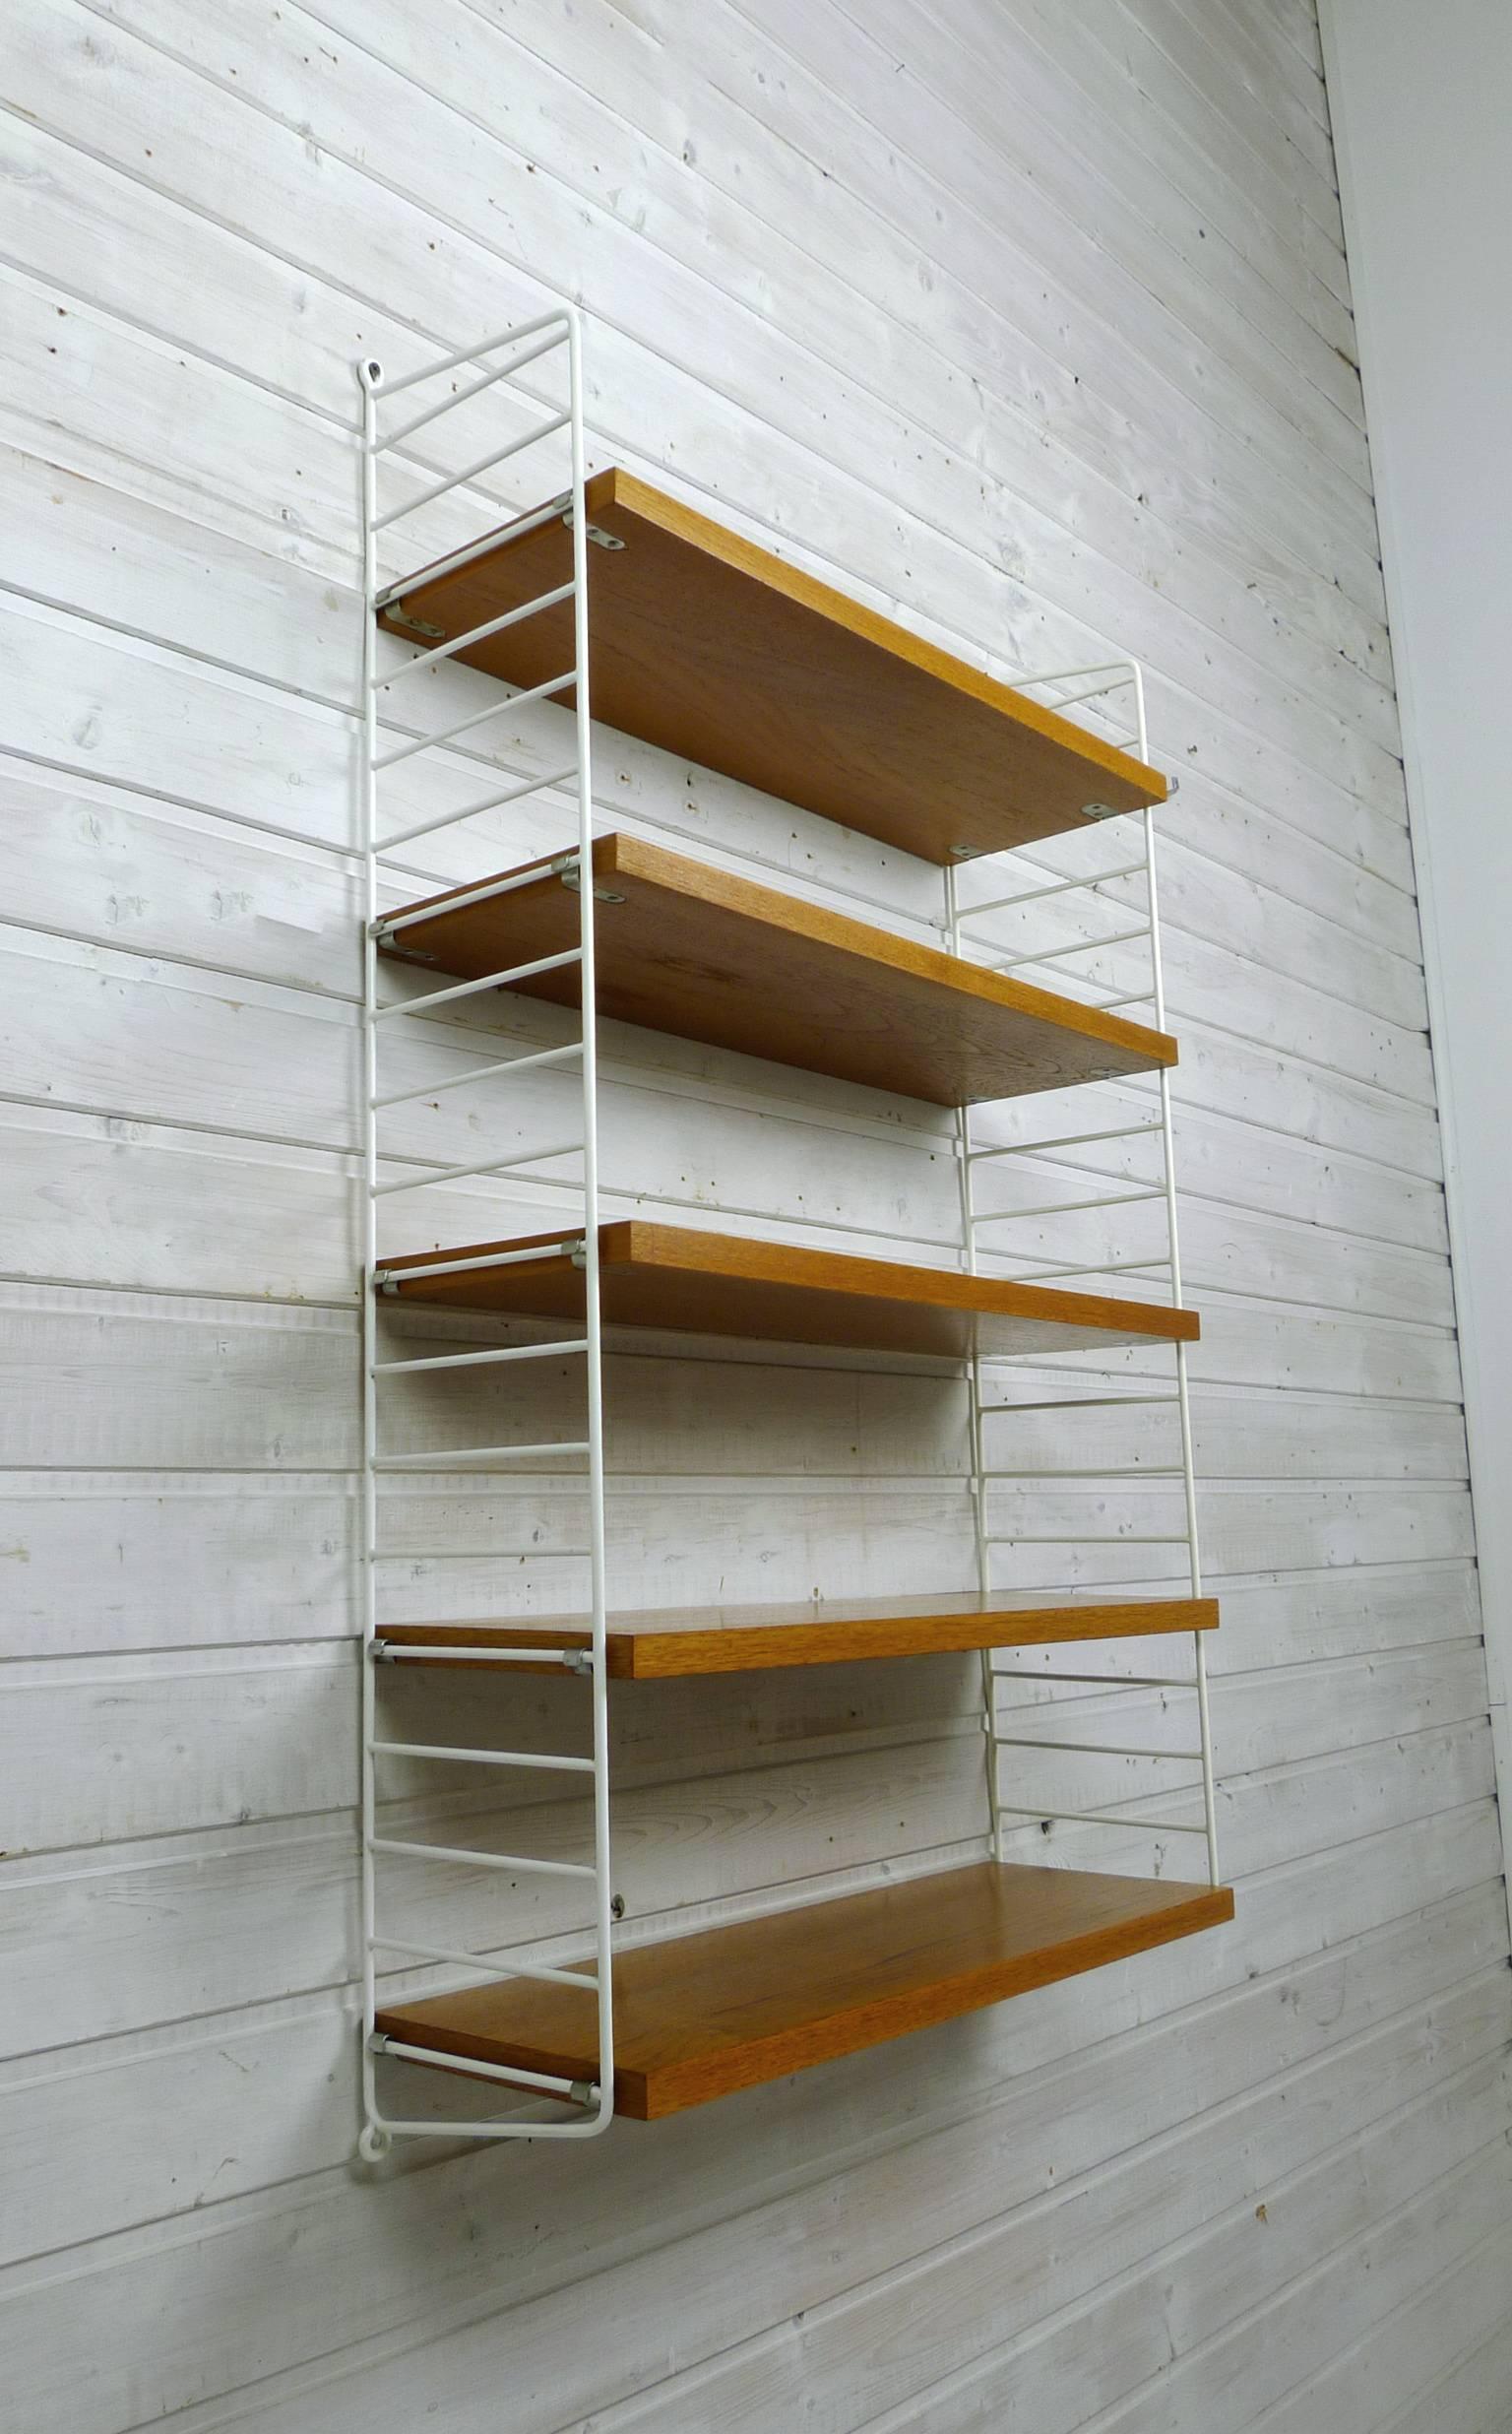 Teak Wall Shelving System by Nisse Strinning for String Design Ab, Sweden, 1960s In Good Condition For Sale In Berlin, DE